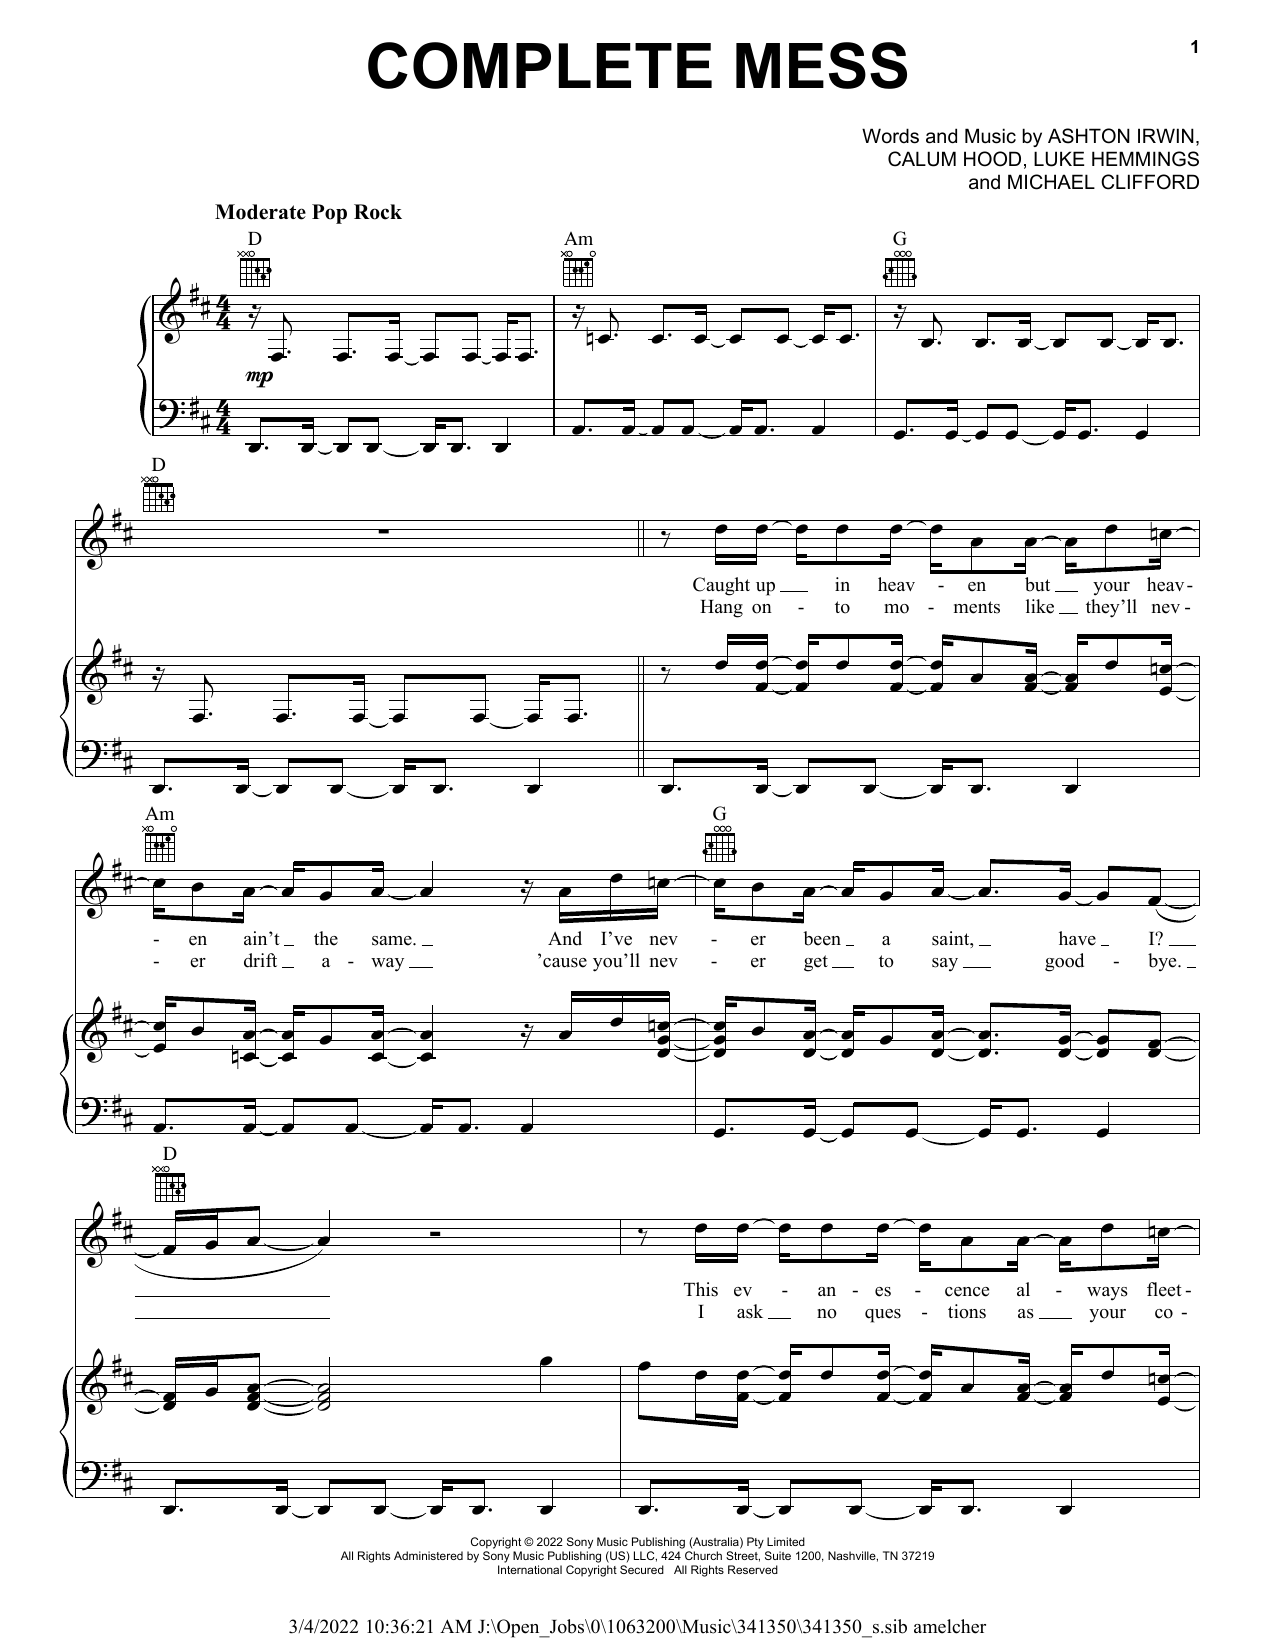 5 Seconds of Summer Complete Mess sheet music notes and chords. Download Printable PDF.